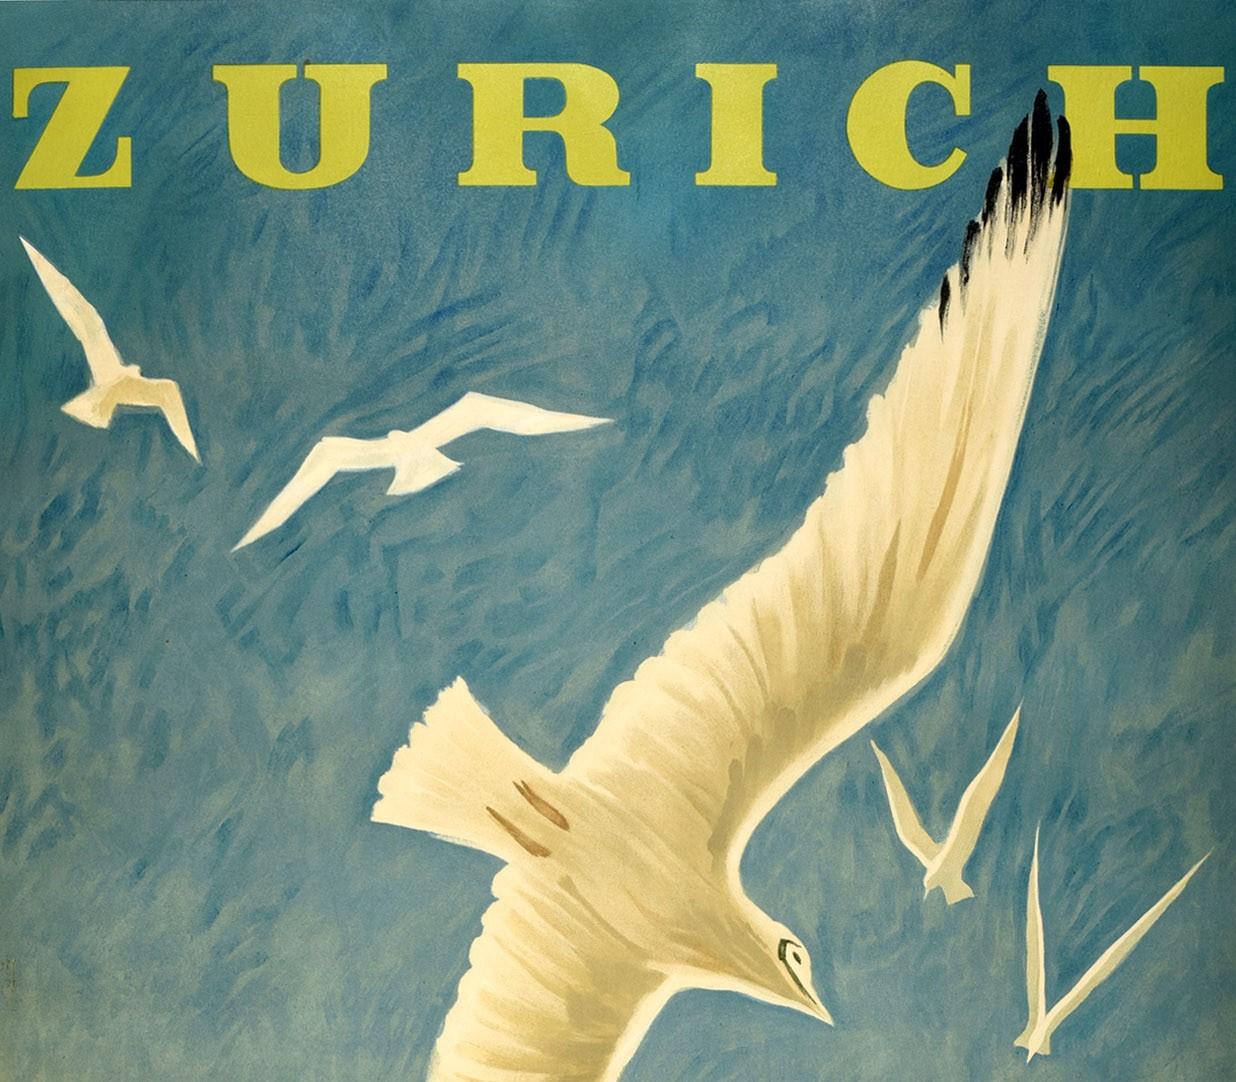 Original vintage travel advertising poster for Zurich Switzerland Suisse Schweiz featuring a great image by the Swiss artist Alex Walter Diggelmann (1902-1987) of the lake with seagulls flying in the foreground, a bright red Swiss flag on the left